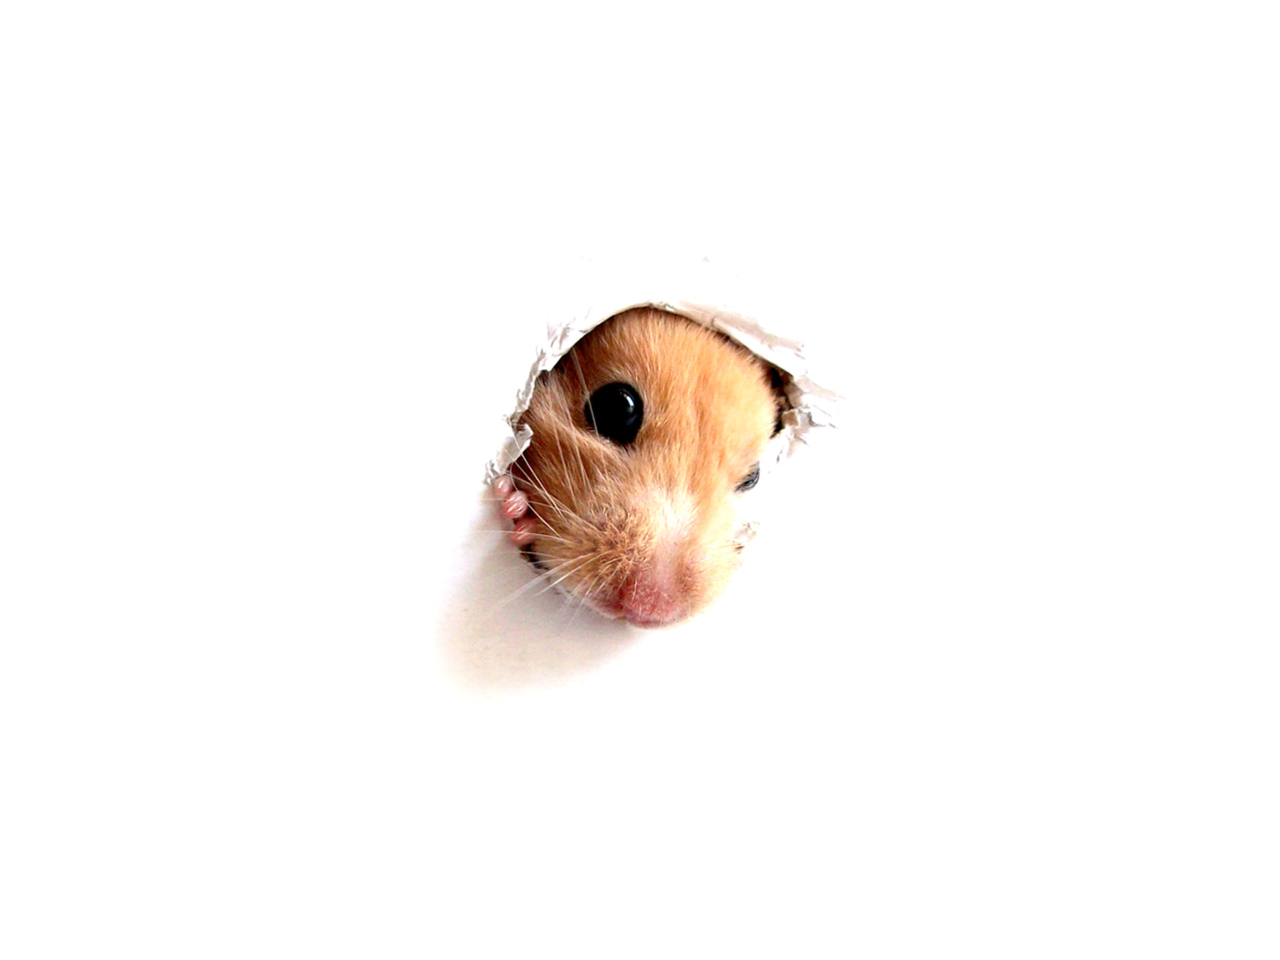 Das Hamster In Hole On Your Screen Wallpaper 1280x960